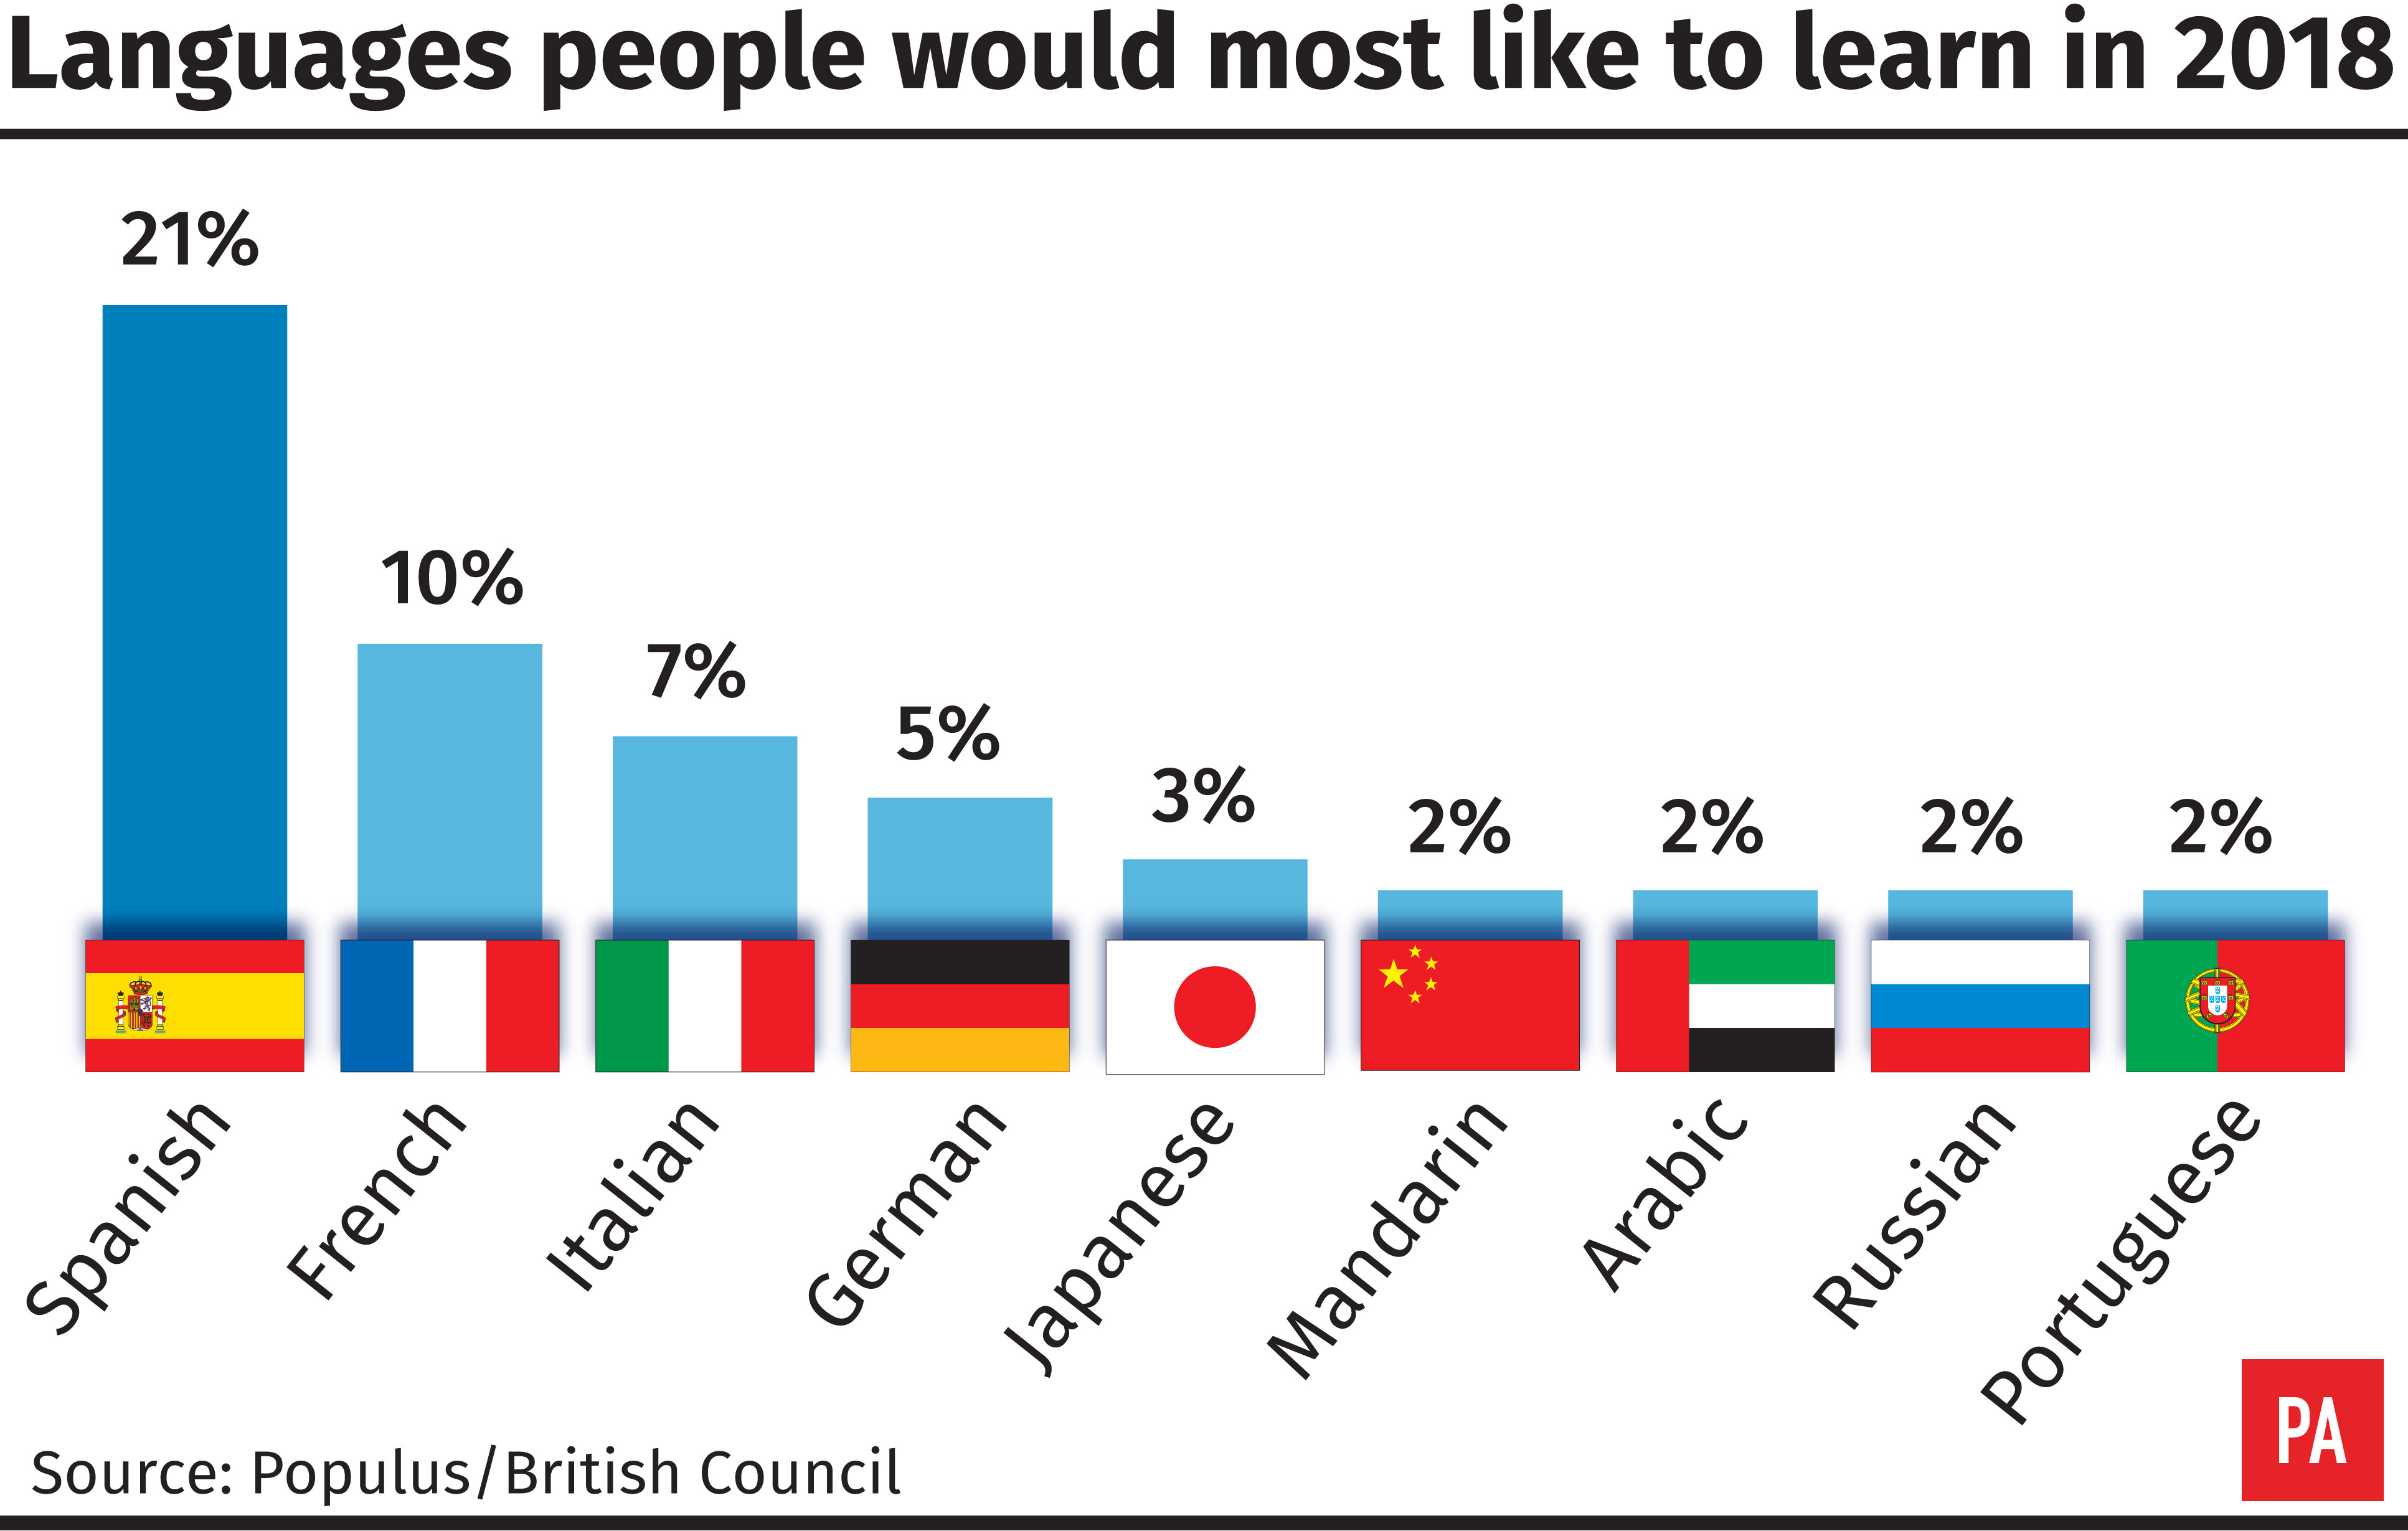 Spanish is the language people would most like to learn, a survey has found.